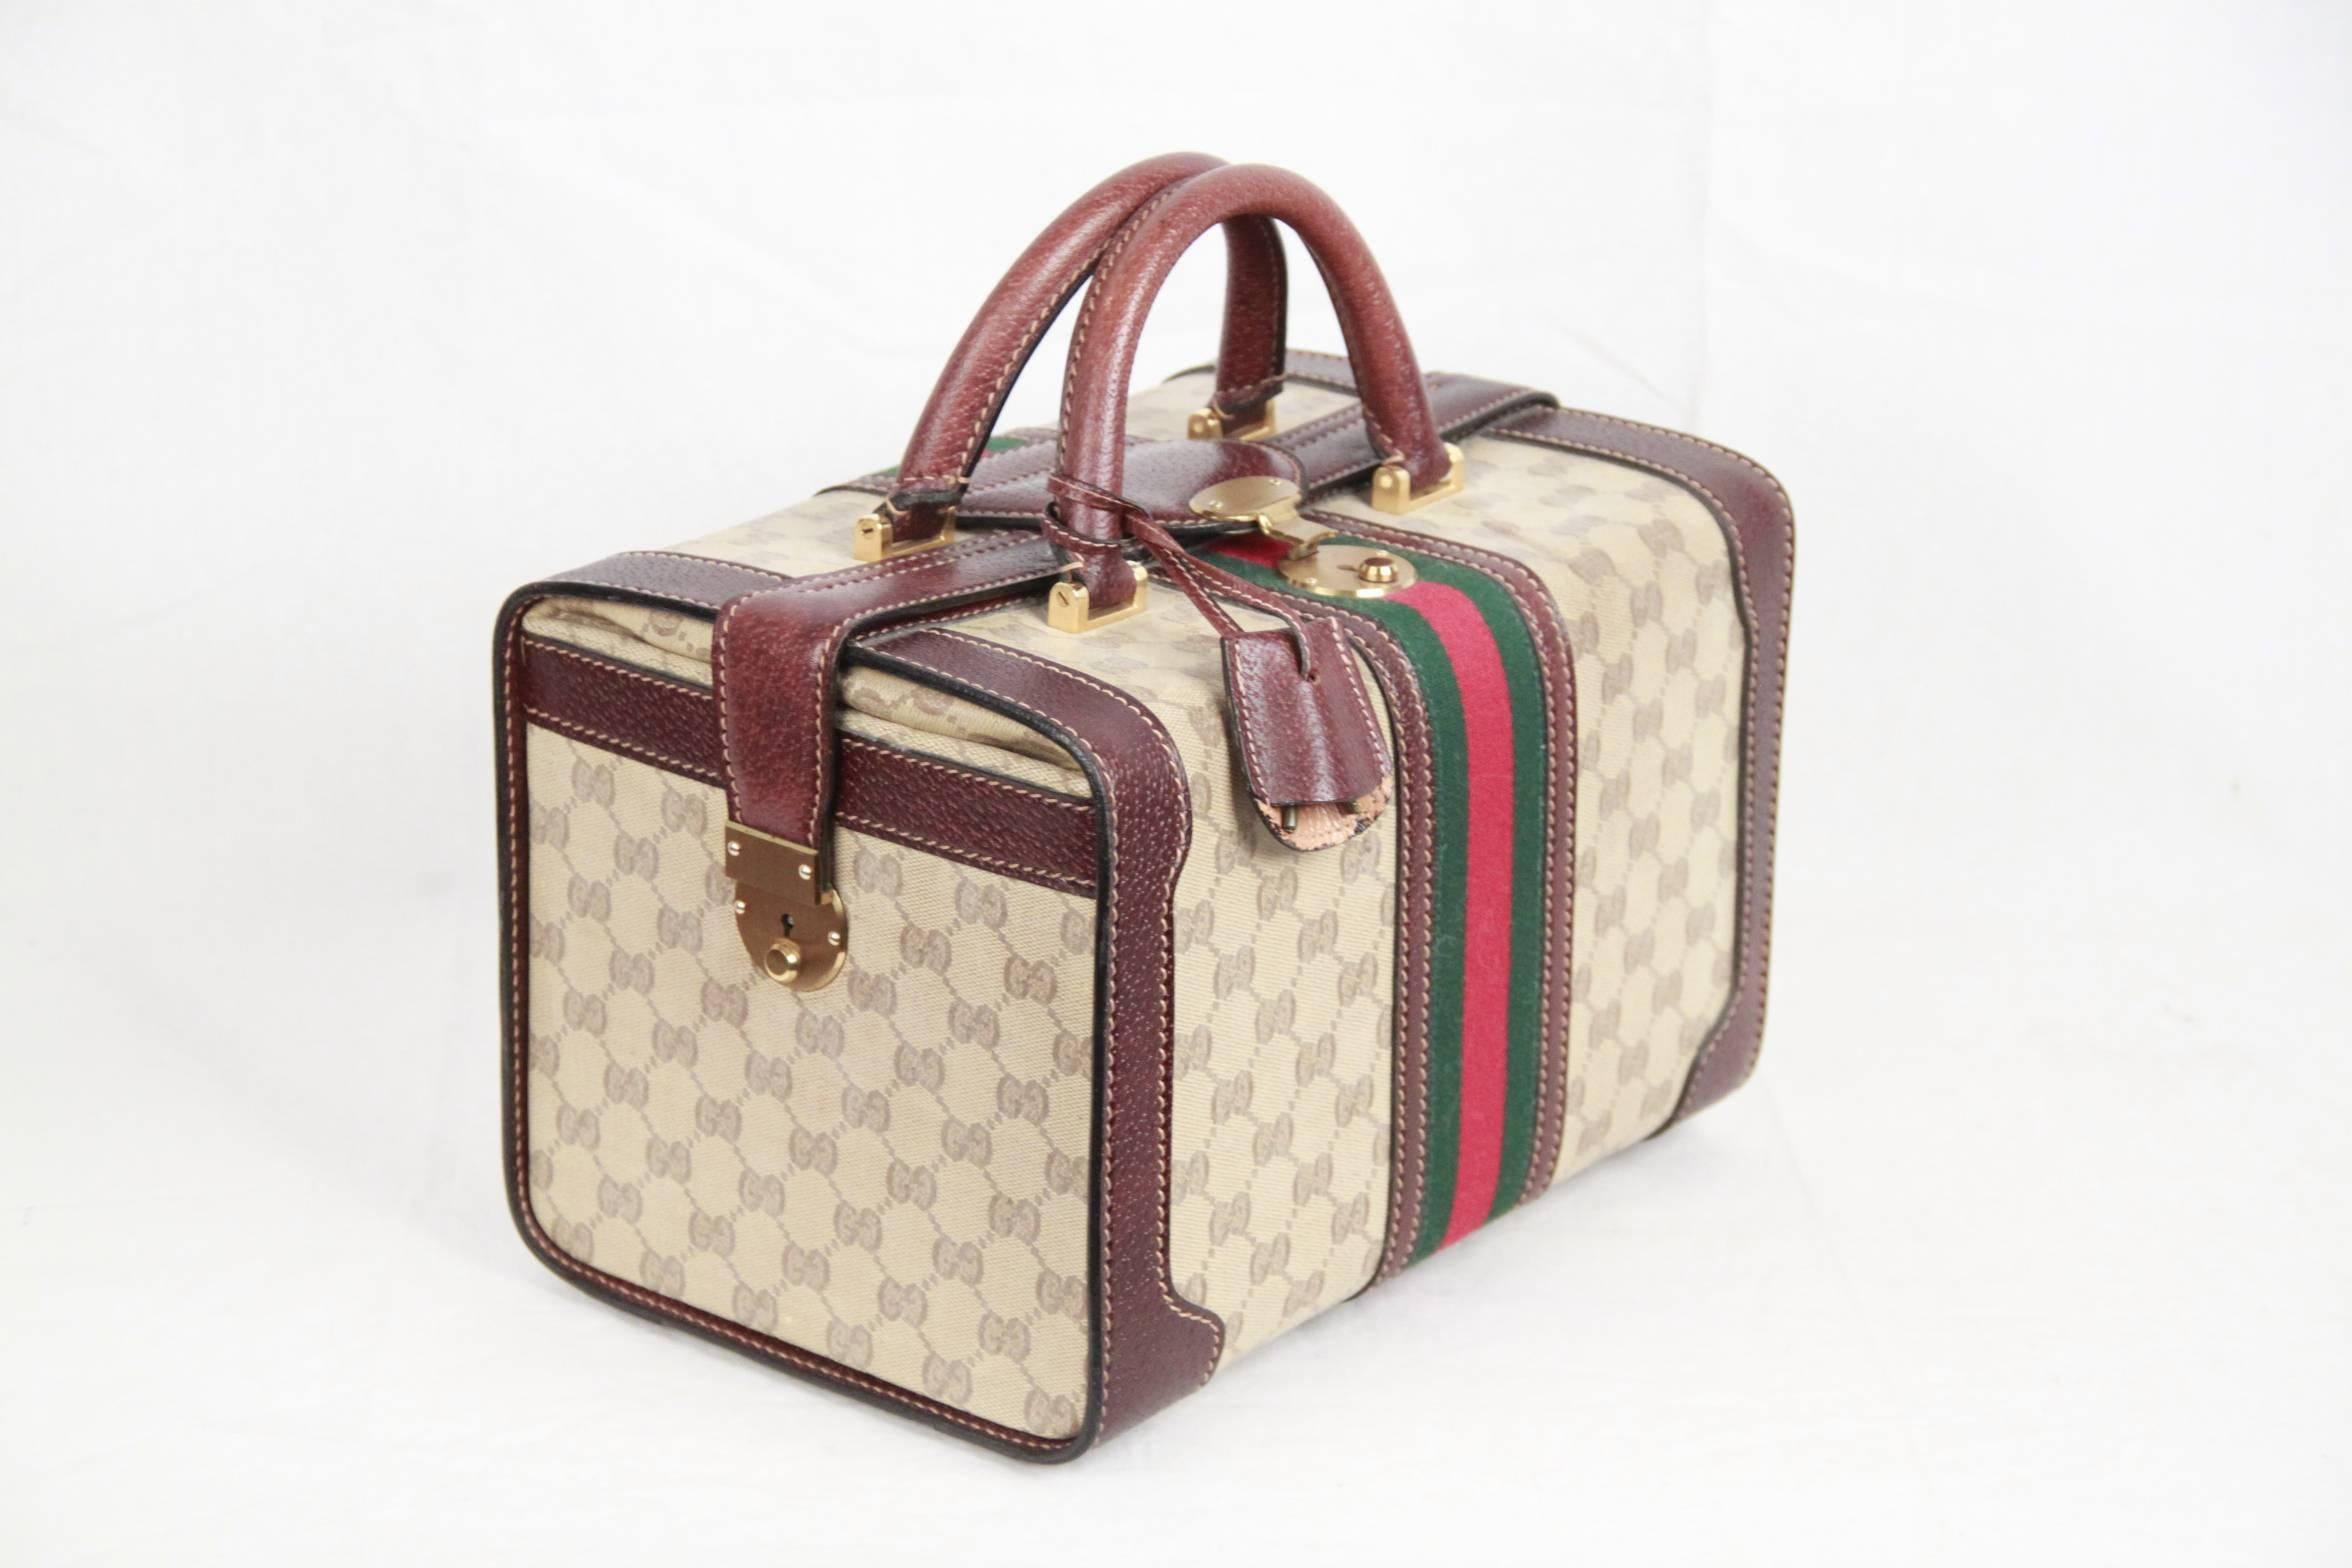  The case has a beautiful, distinctive structure and is crafted of classic Gucci brown on beige GG monogram. Signature web detailing around the bag. This has a complimentary trim of brown leather for structure and style including rolled leather top